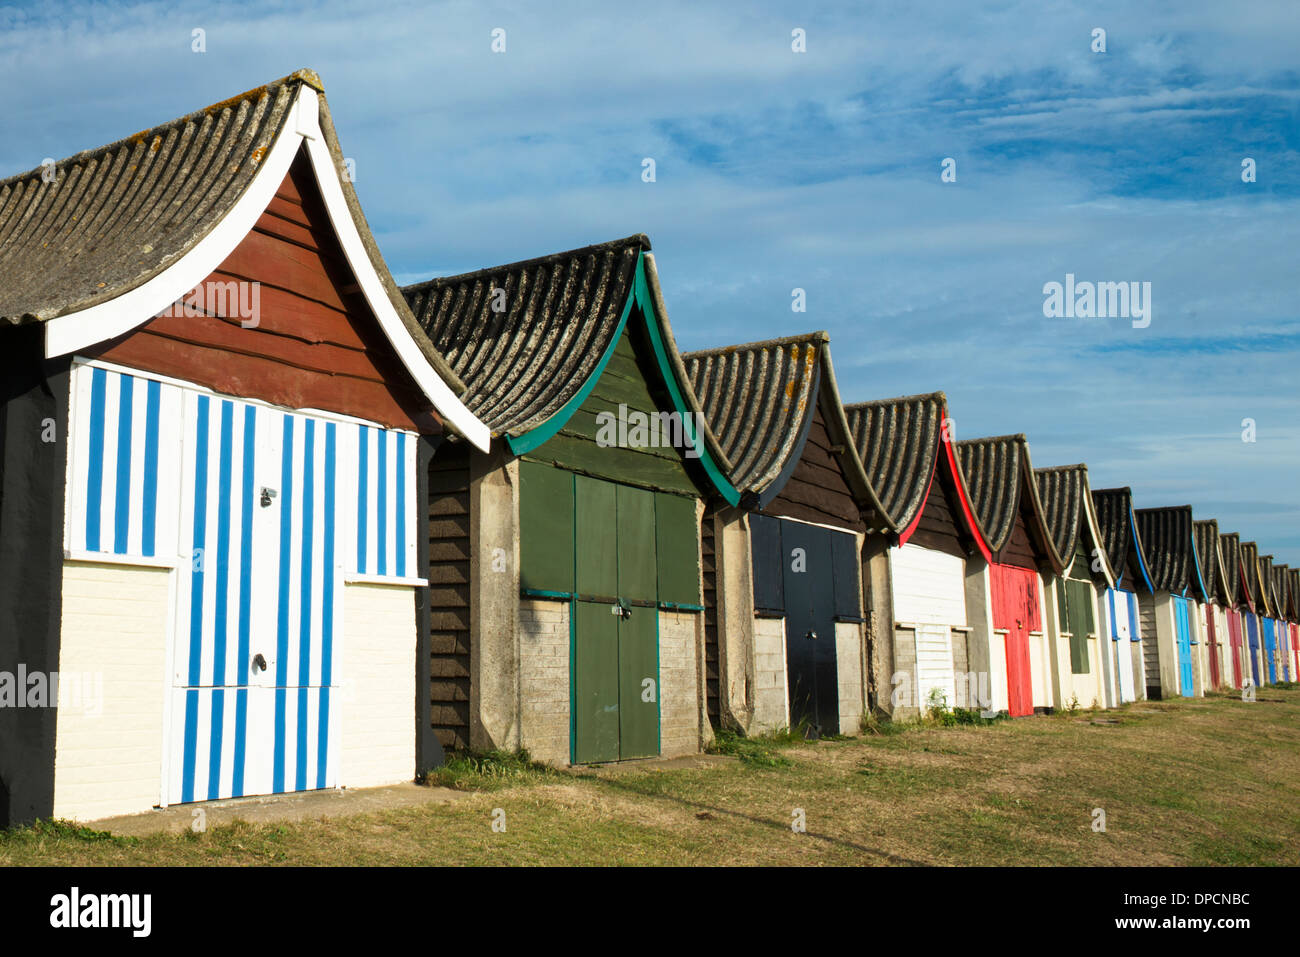 Colorful Beach Huts at Mablethorpe, Lincolnshire, UK. Stock Photo